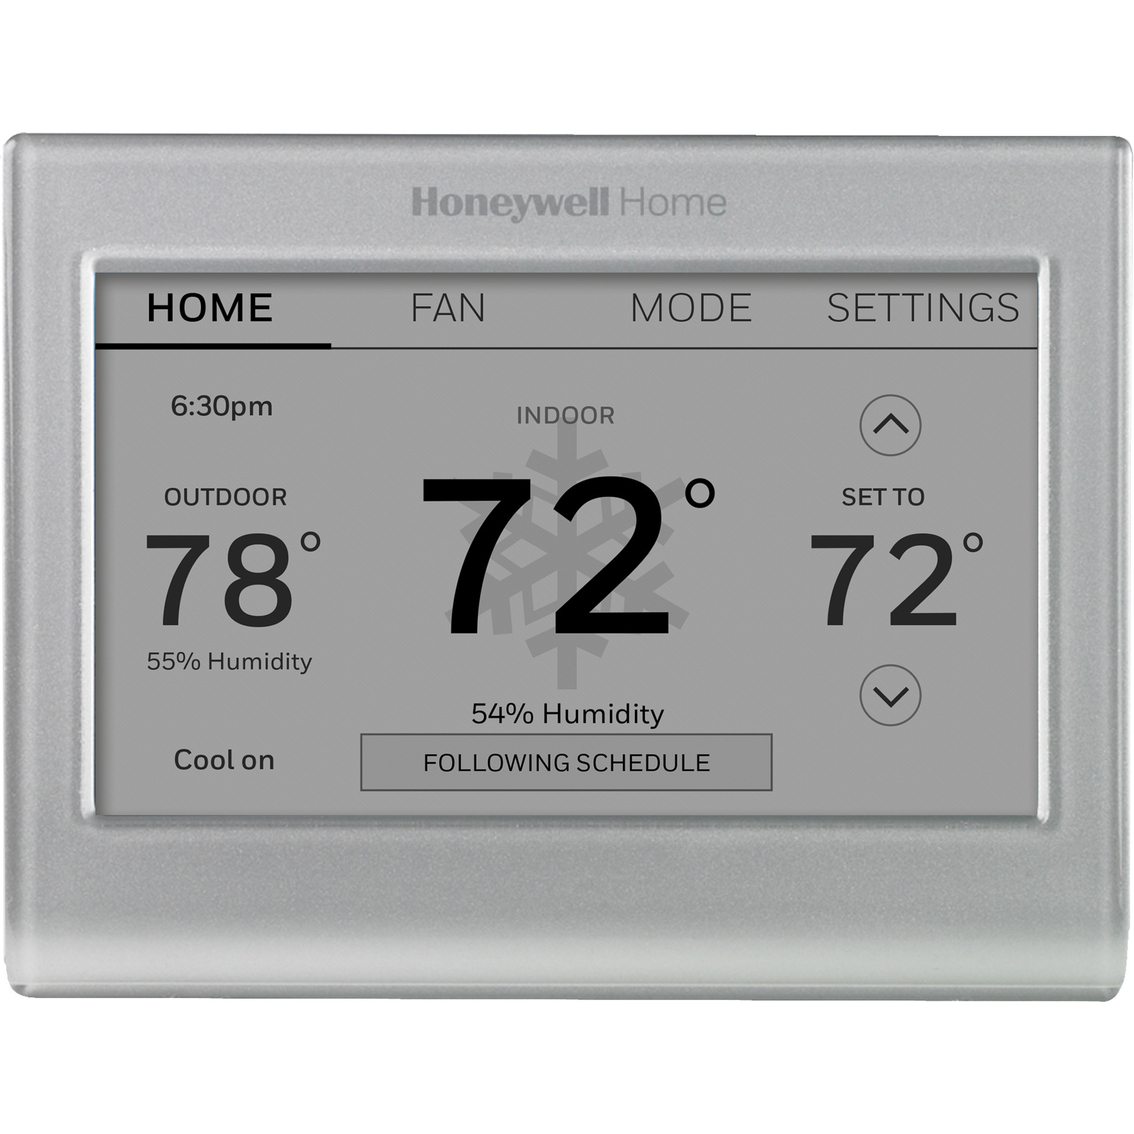 Honeywell WiFi Smart Color Thermostat - Image 2 of 9